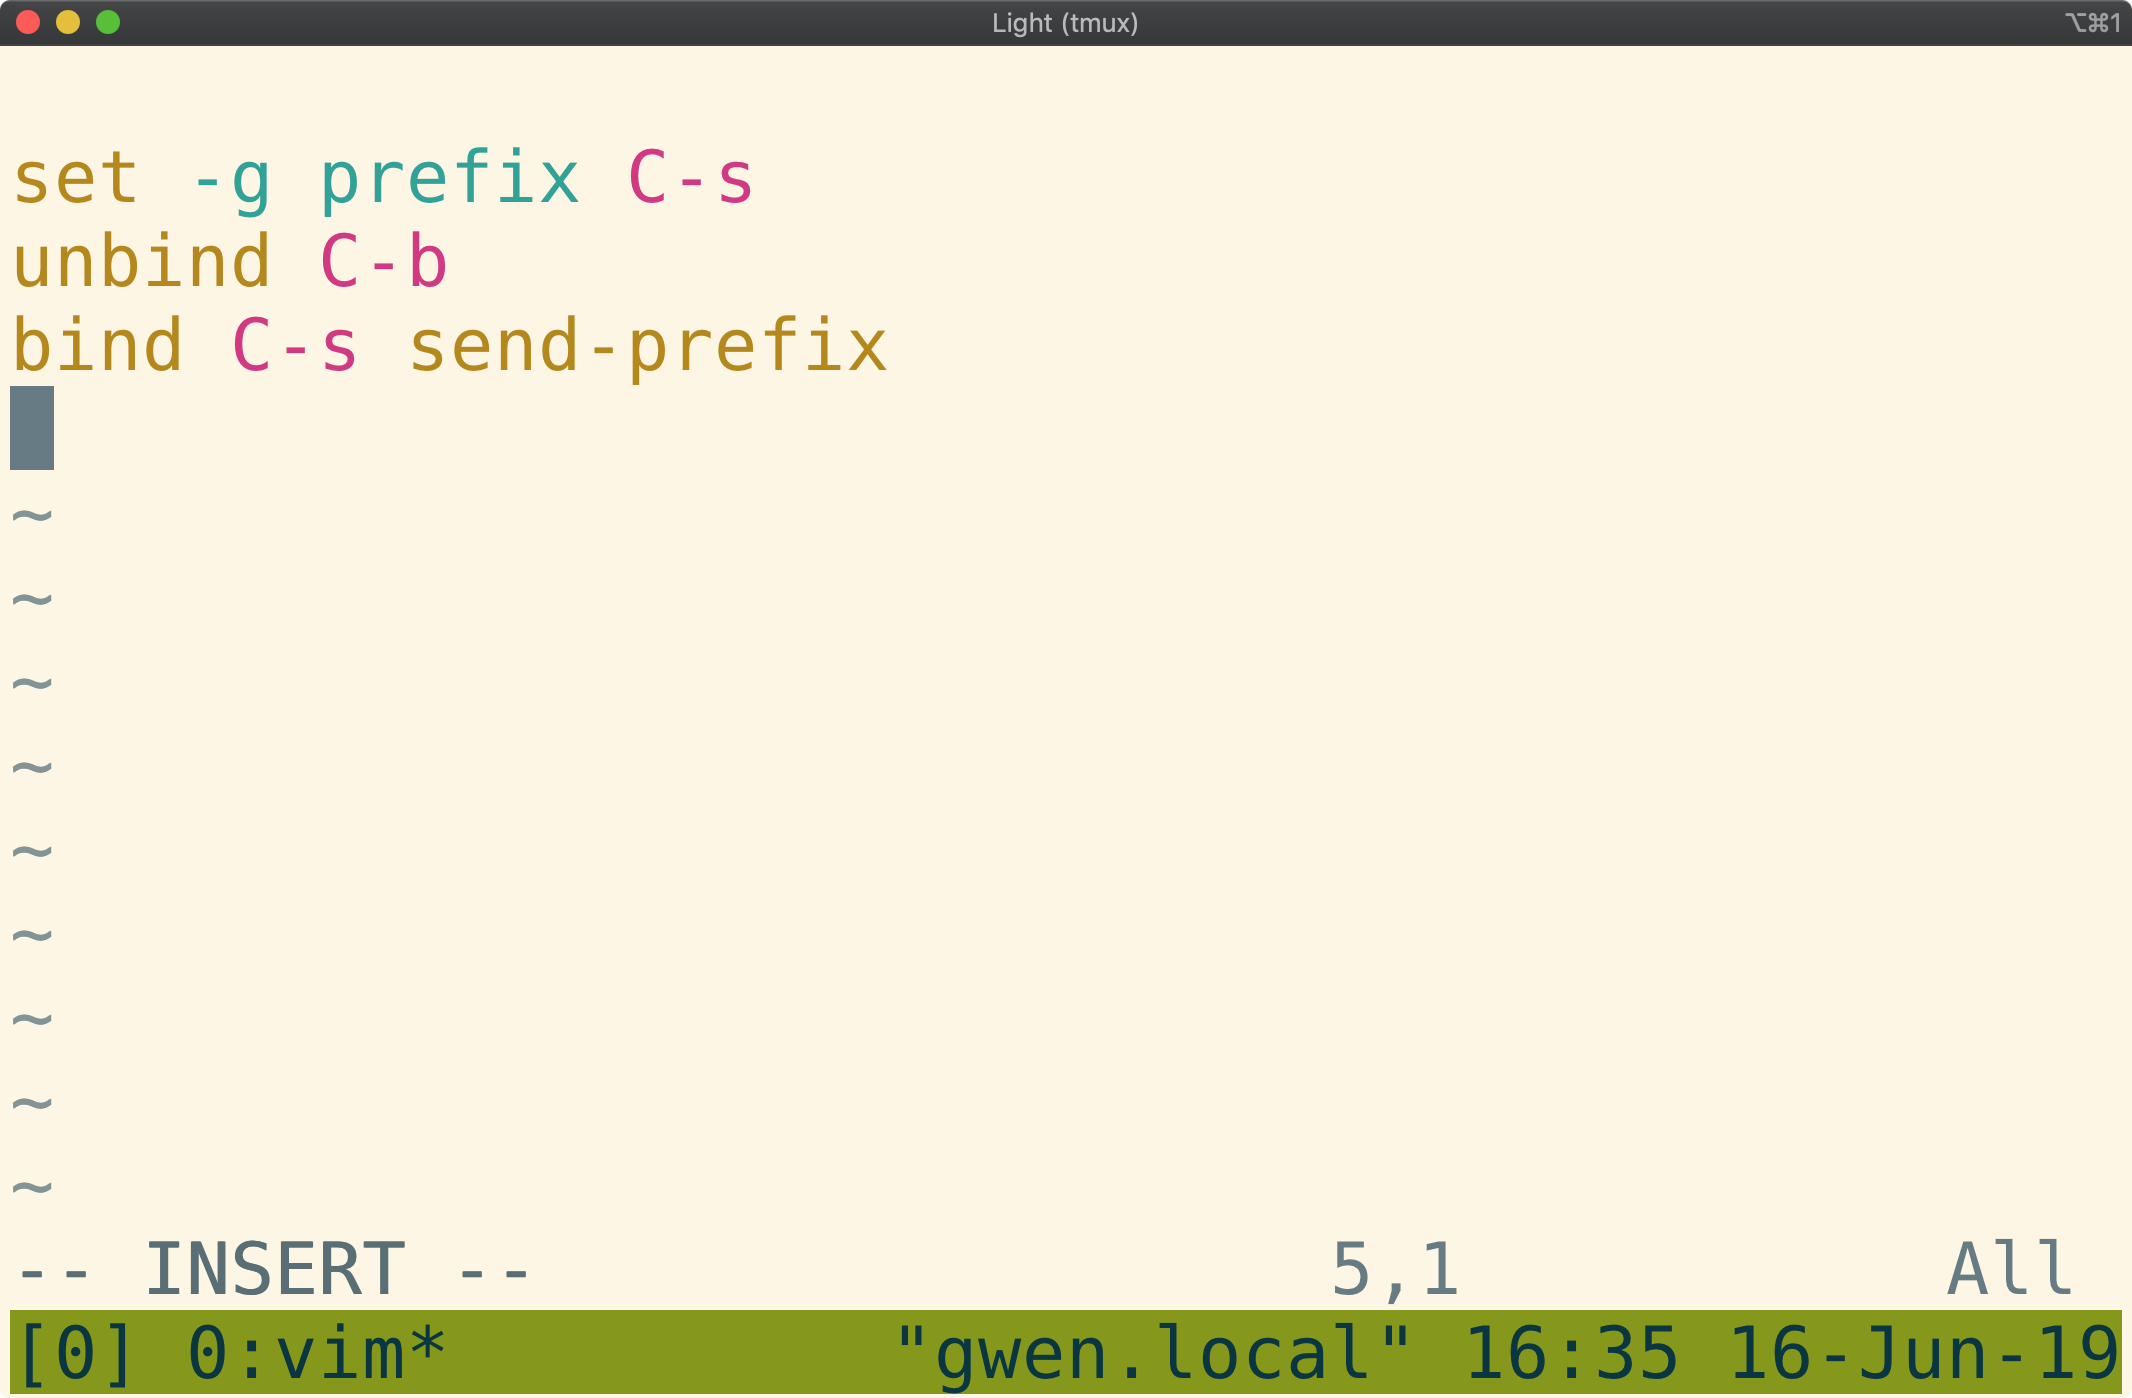 vim window showing bind for send-prefix added to
config